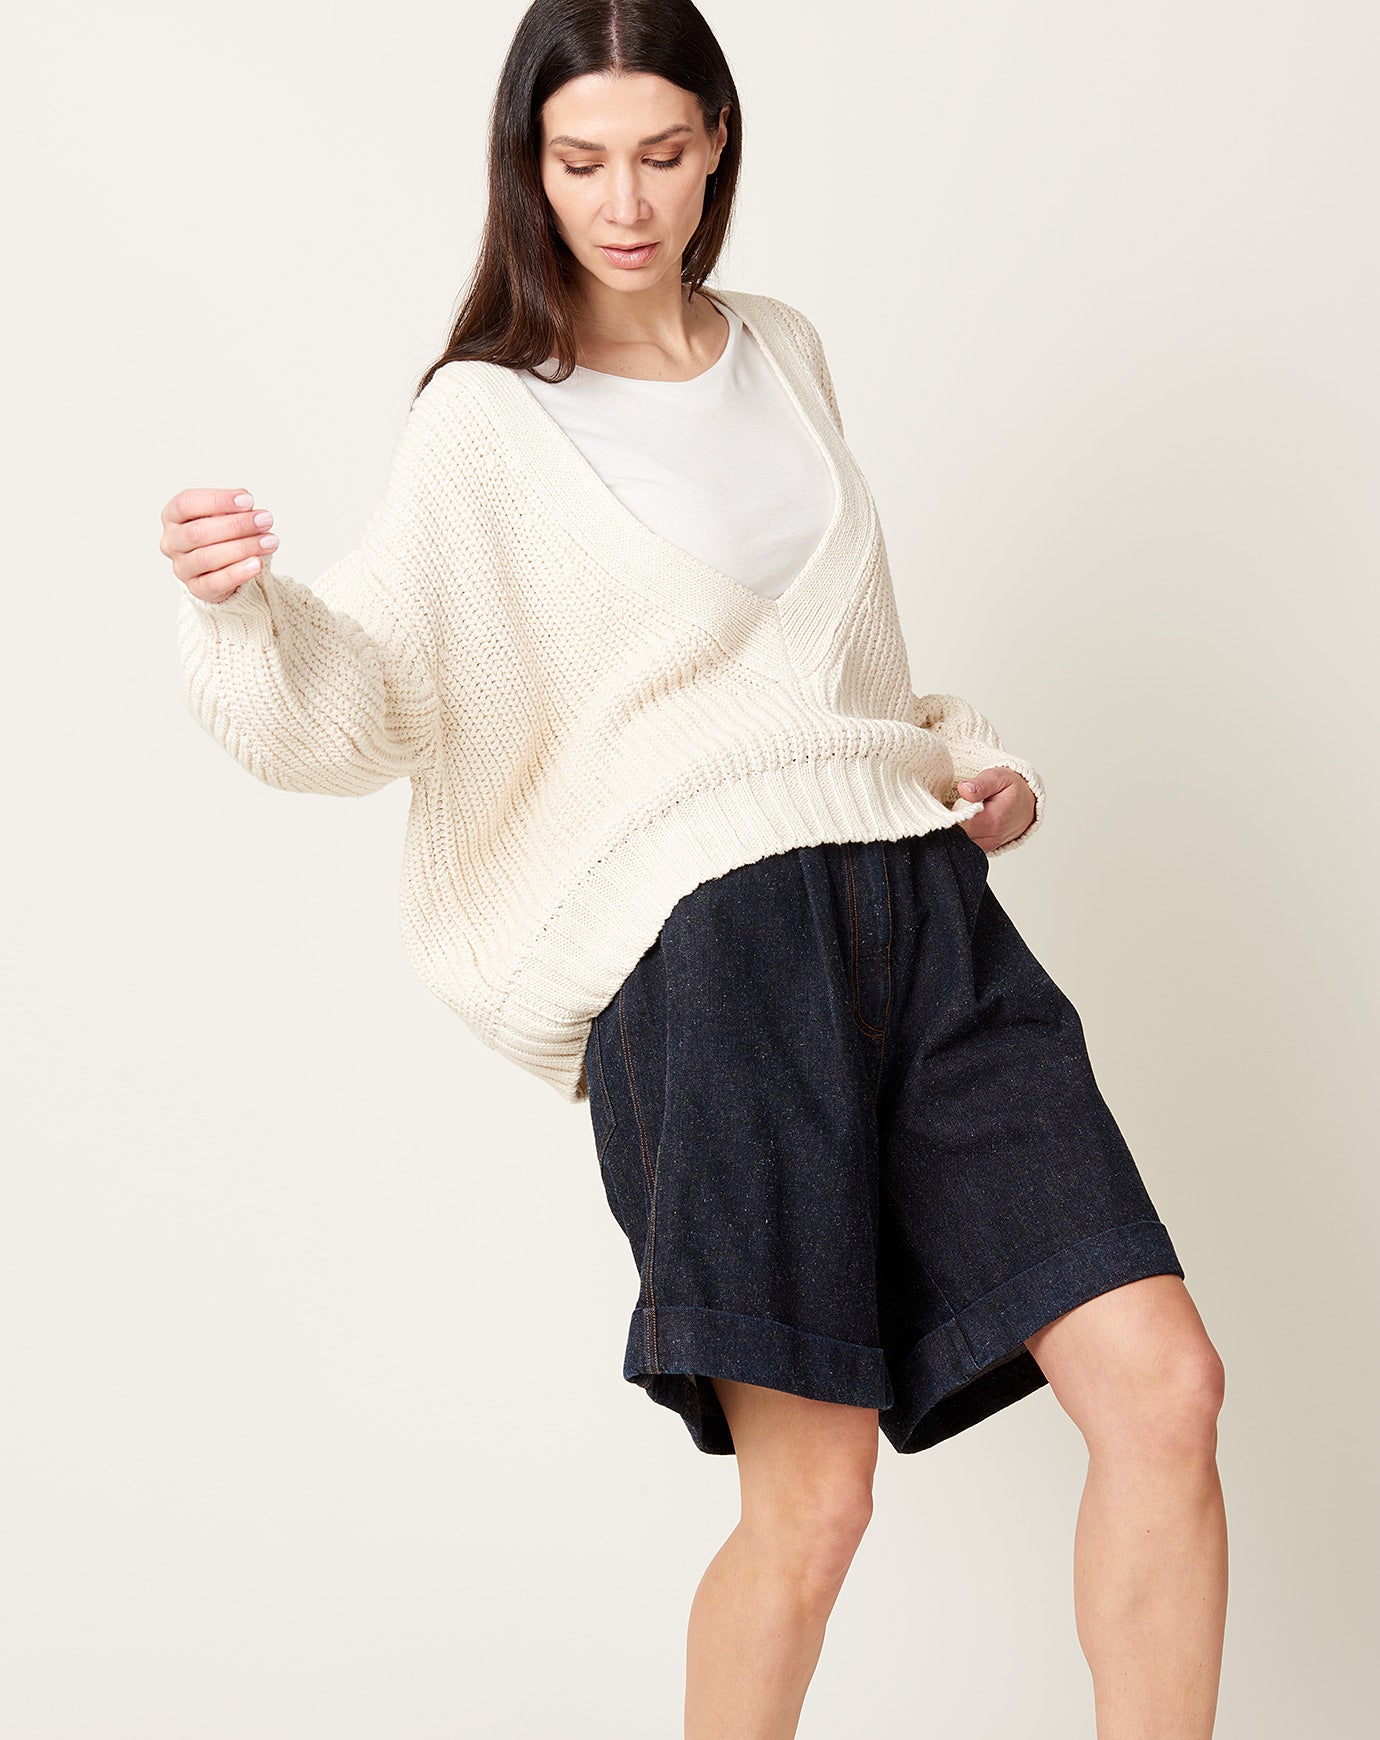 Cordera Cotton Sweater in Natural